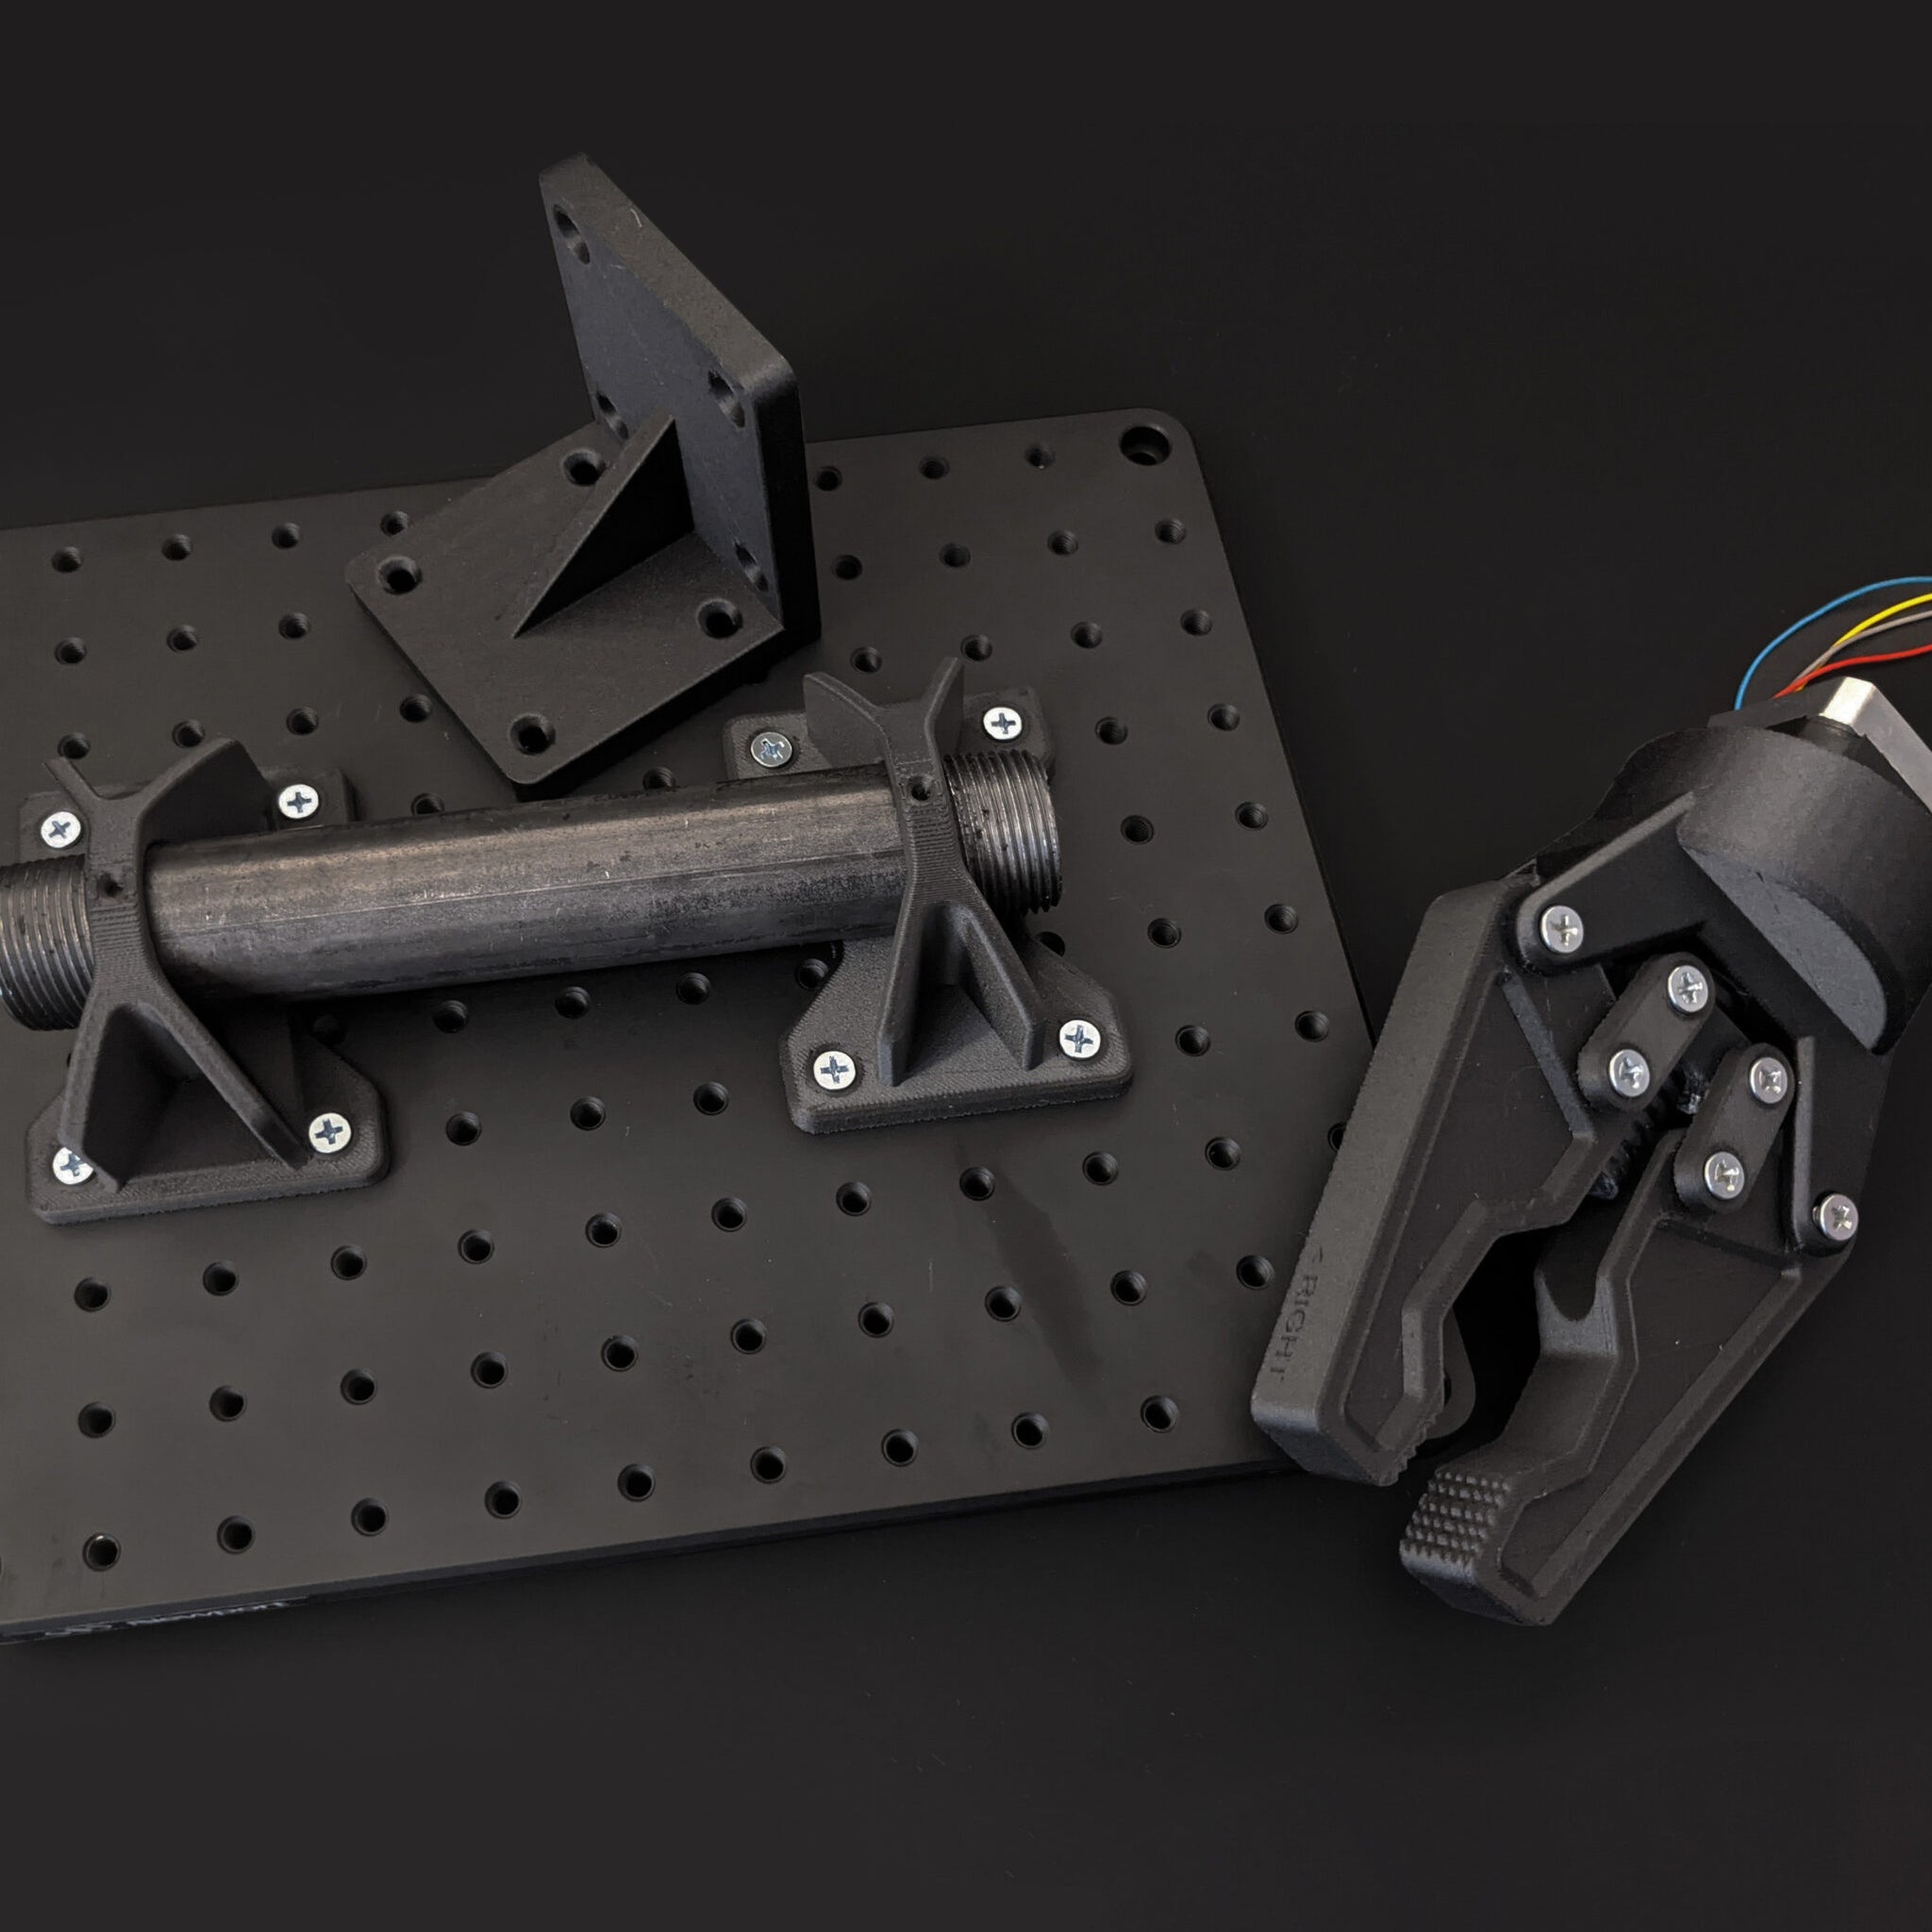 Enhancing your jigs and fixtures with carbon fiber composites